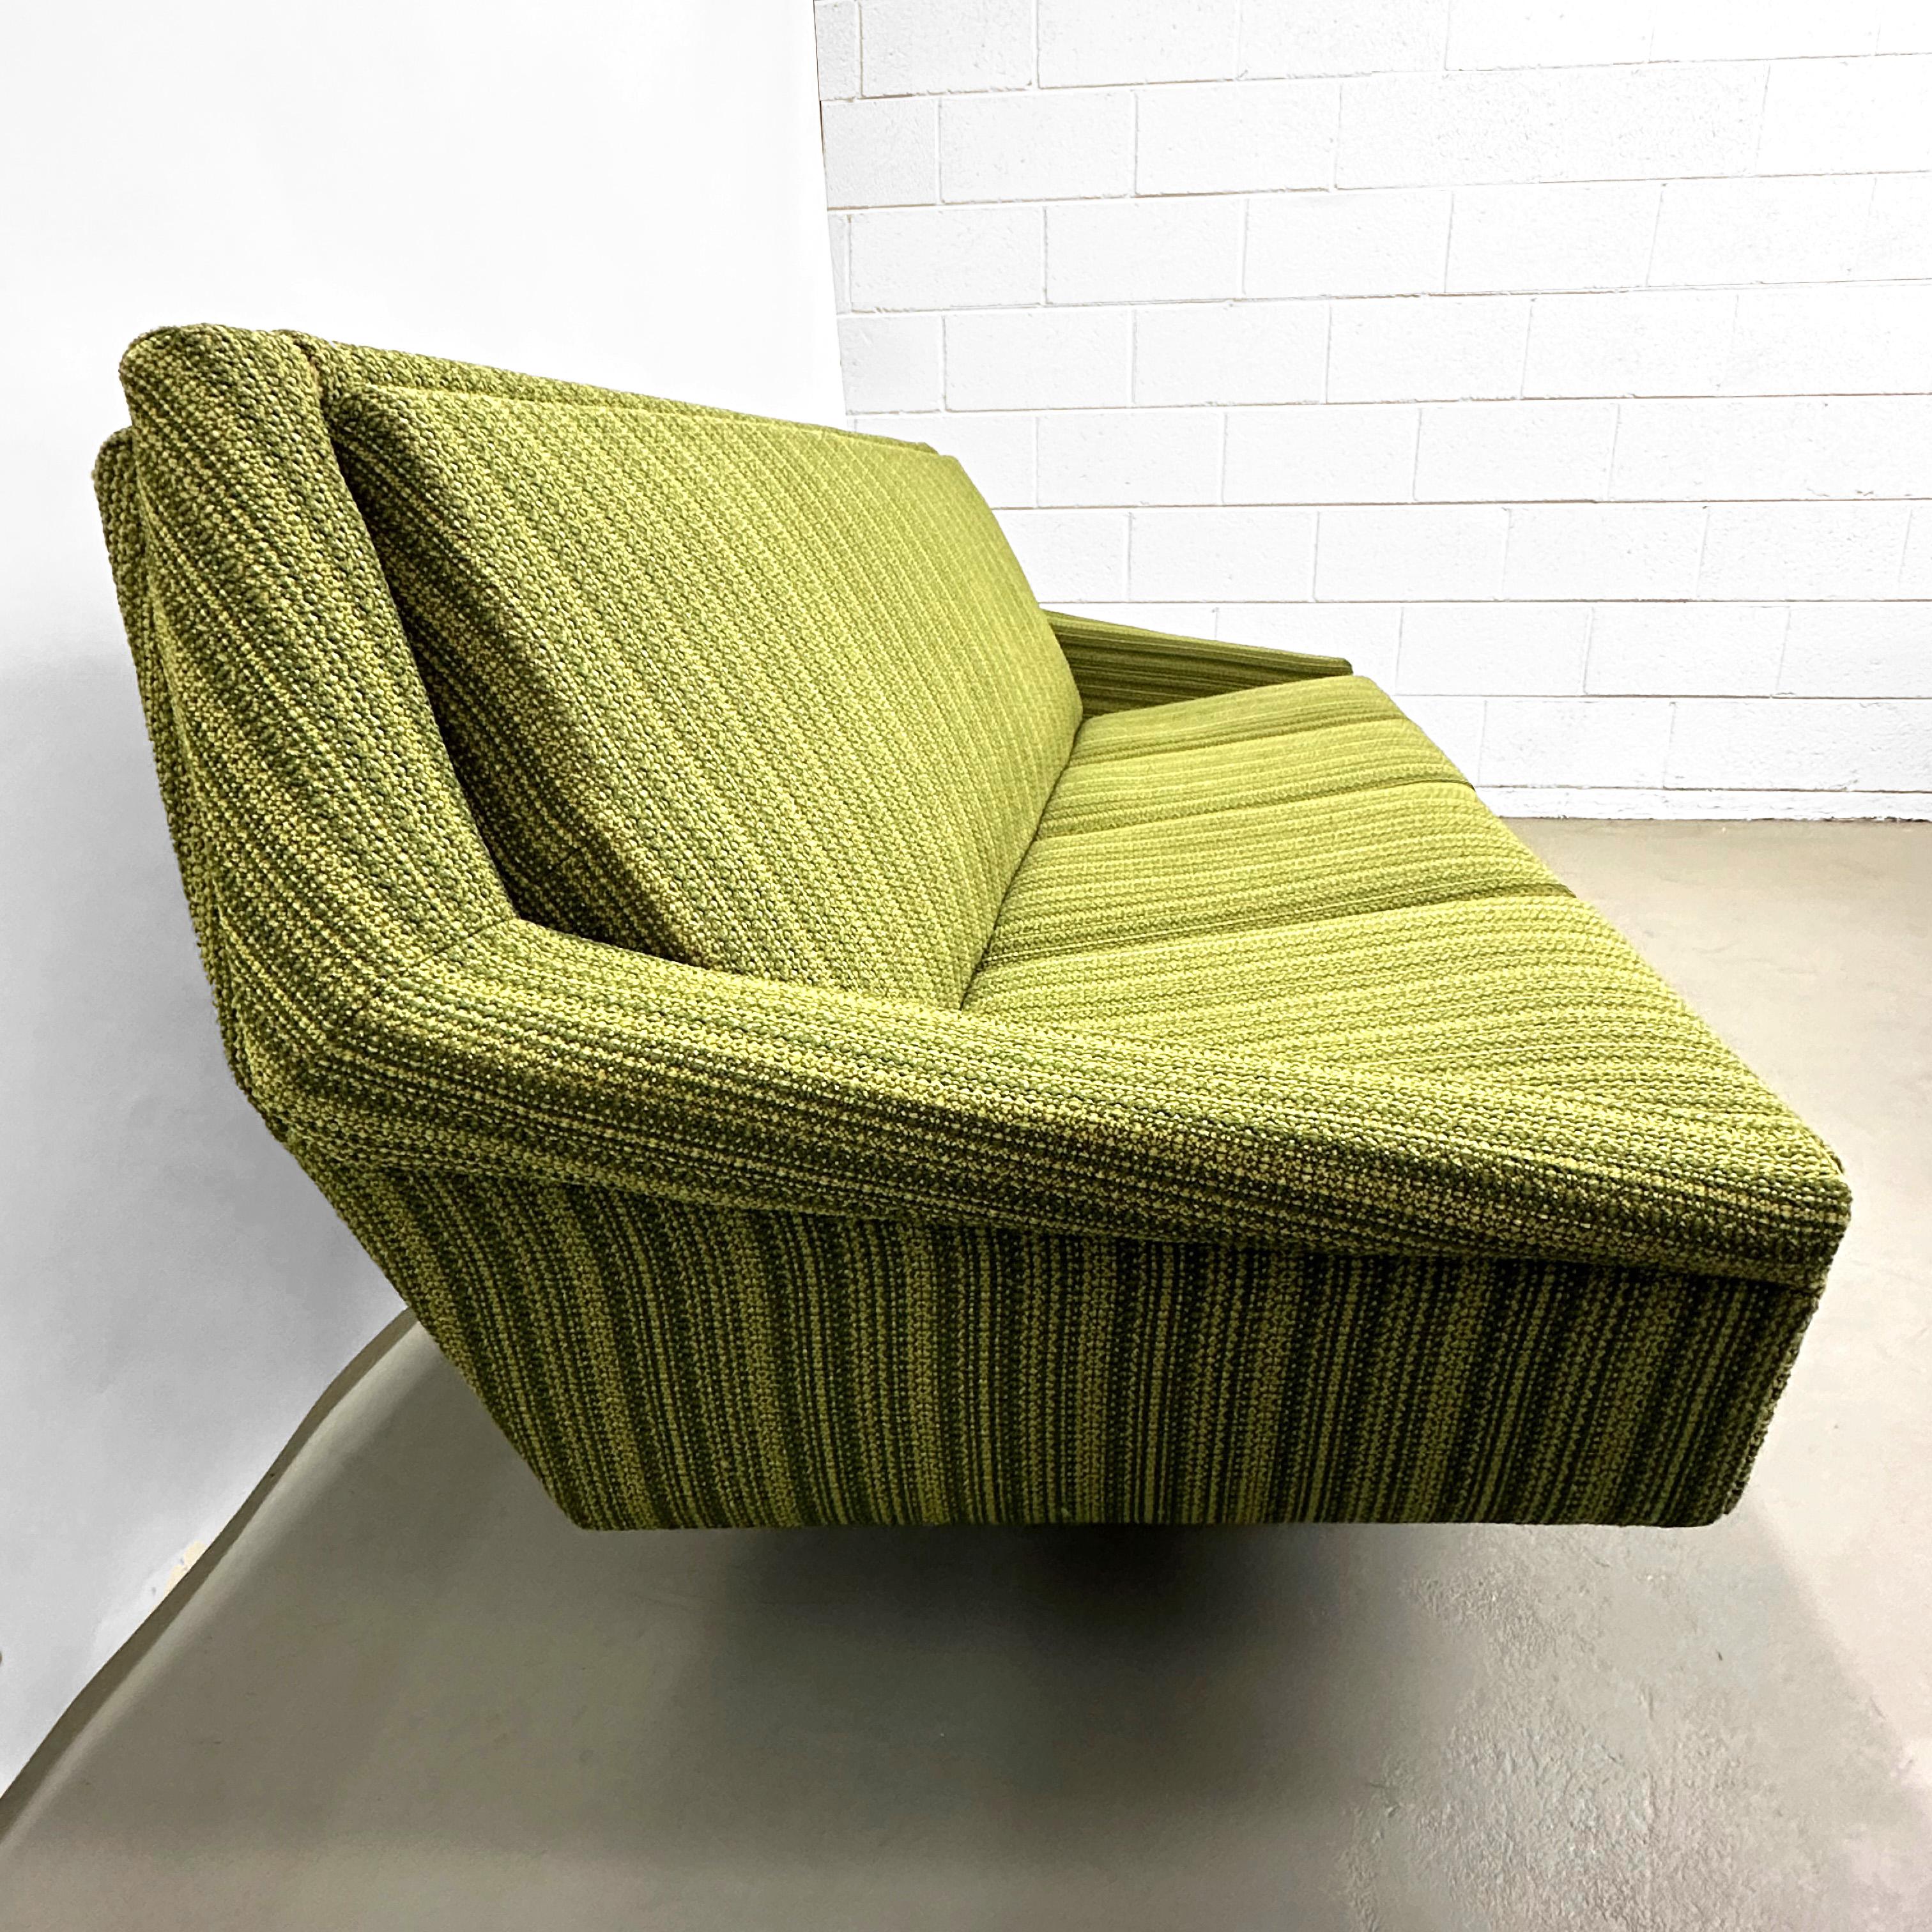 Sofa by Bengt Ruda for IKEA. Sweden, 1961.

Original soft jute-like, textured weave upholstery in key lime and avocado stripes. The durable fabric is comfortable to the touch, and the solidly built frame remains in strong, sturdy condition, as well.